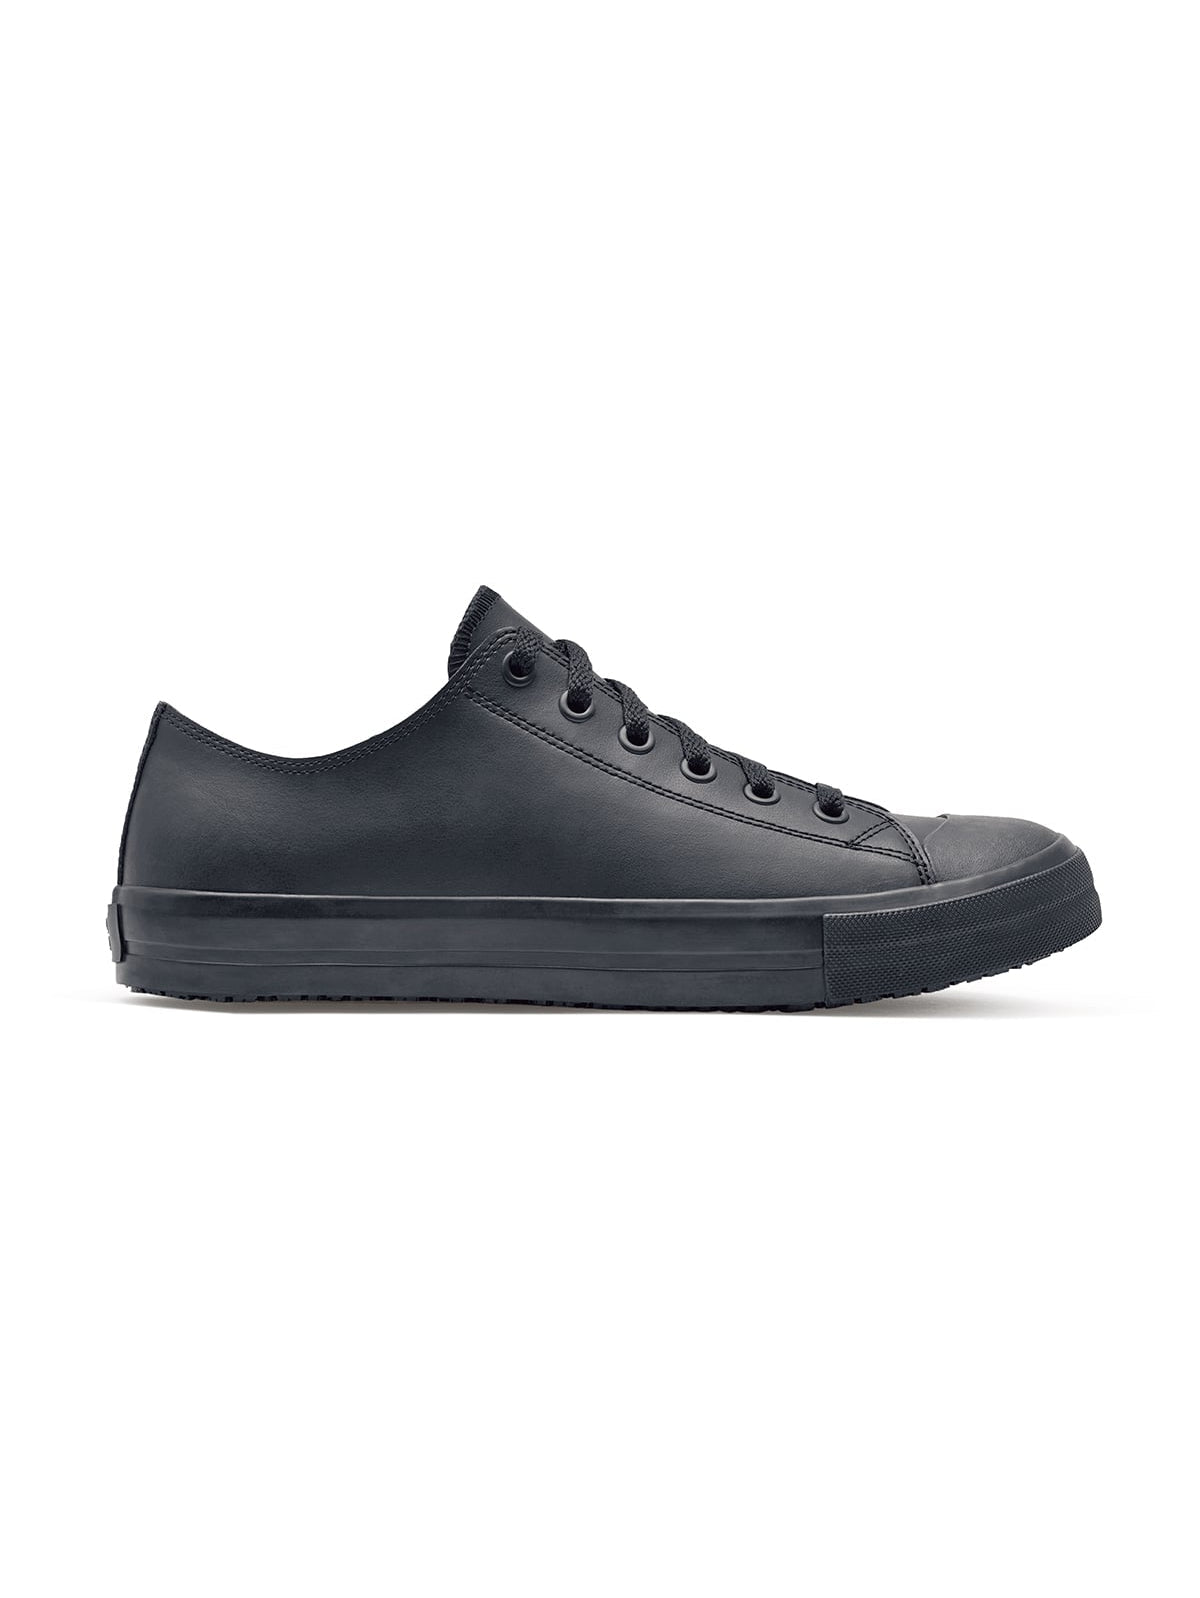 Unisex Work Shoe Delray by Shoes For Crews -  ChefsCotton